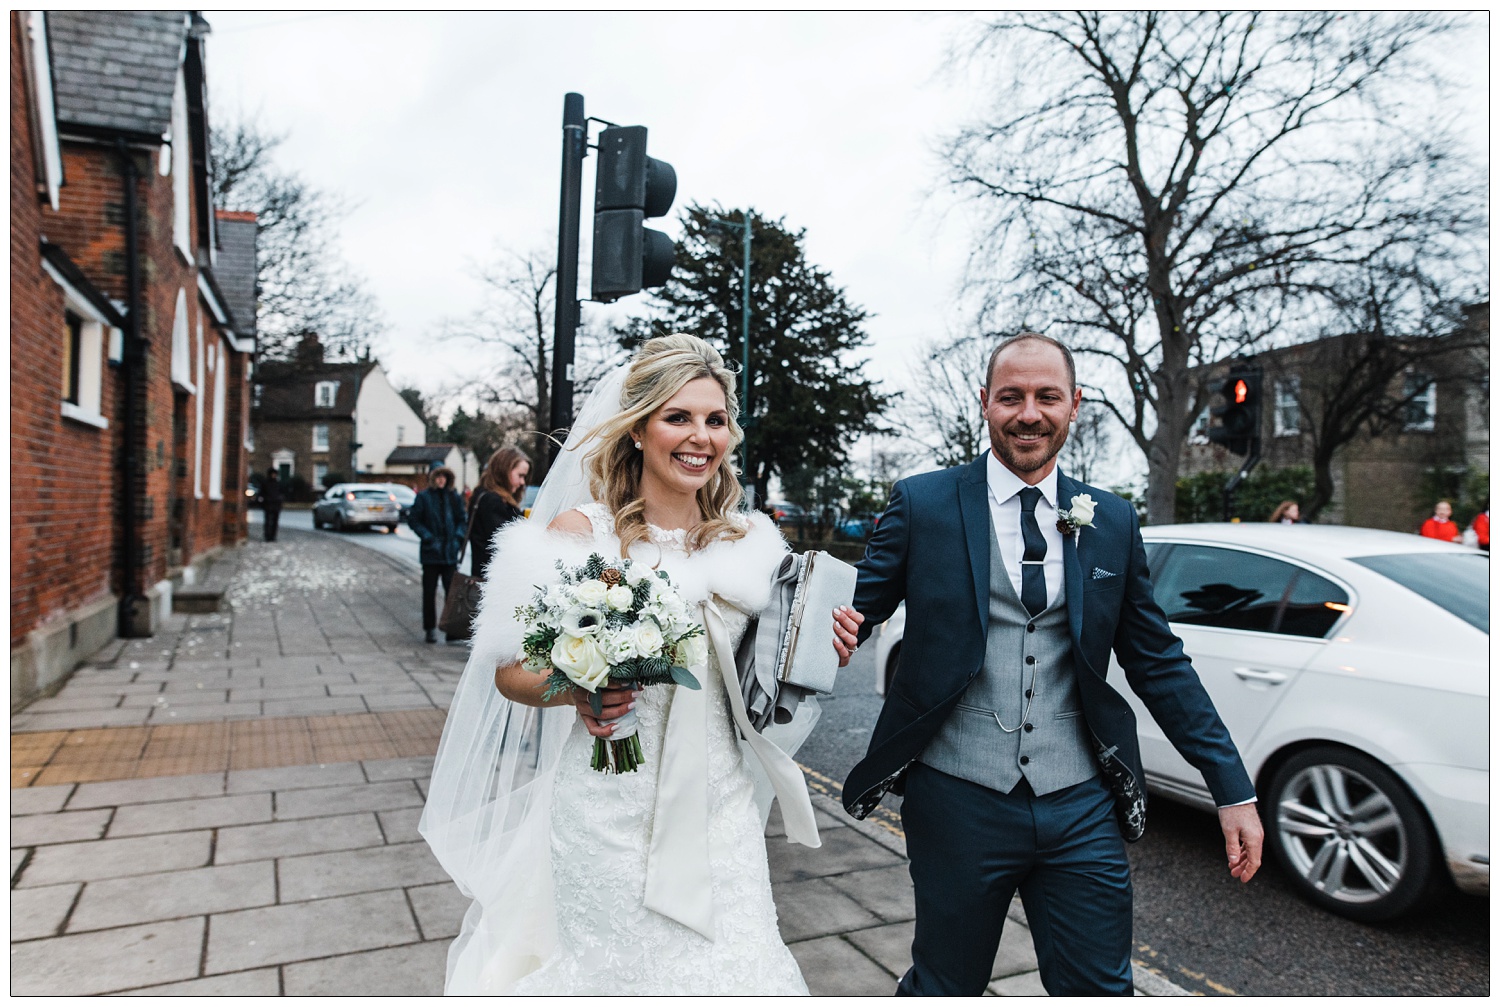 Bride and groom walk along the street in Rayleigh.